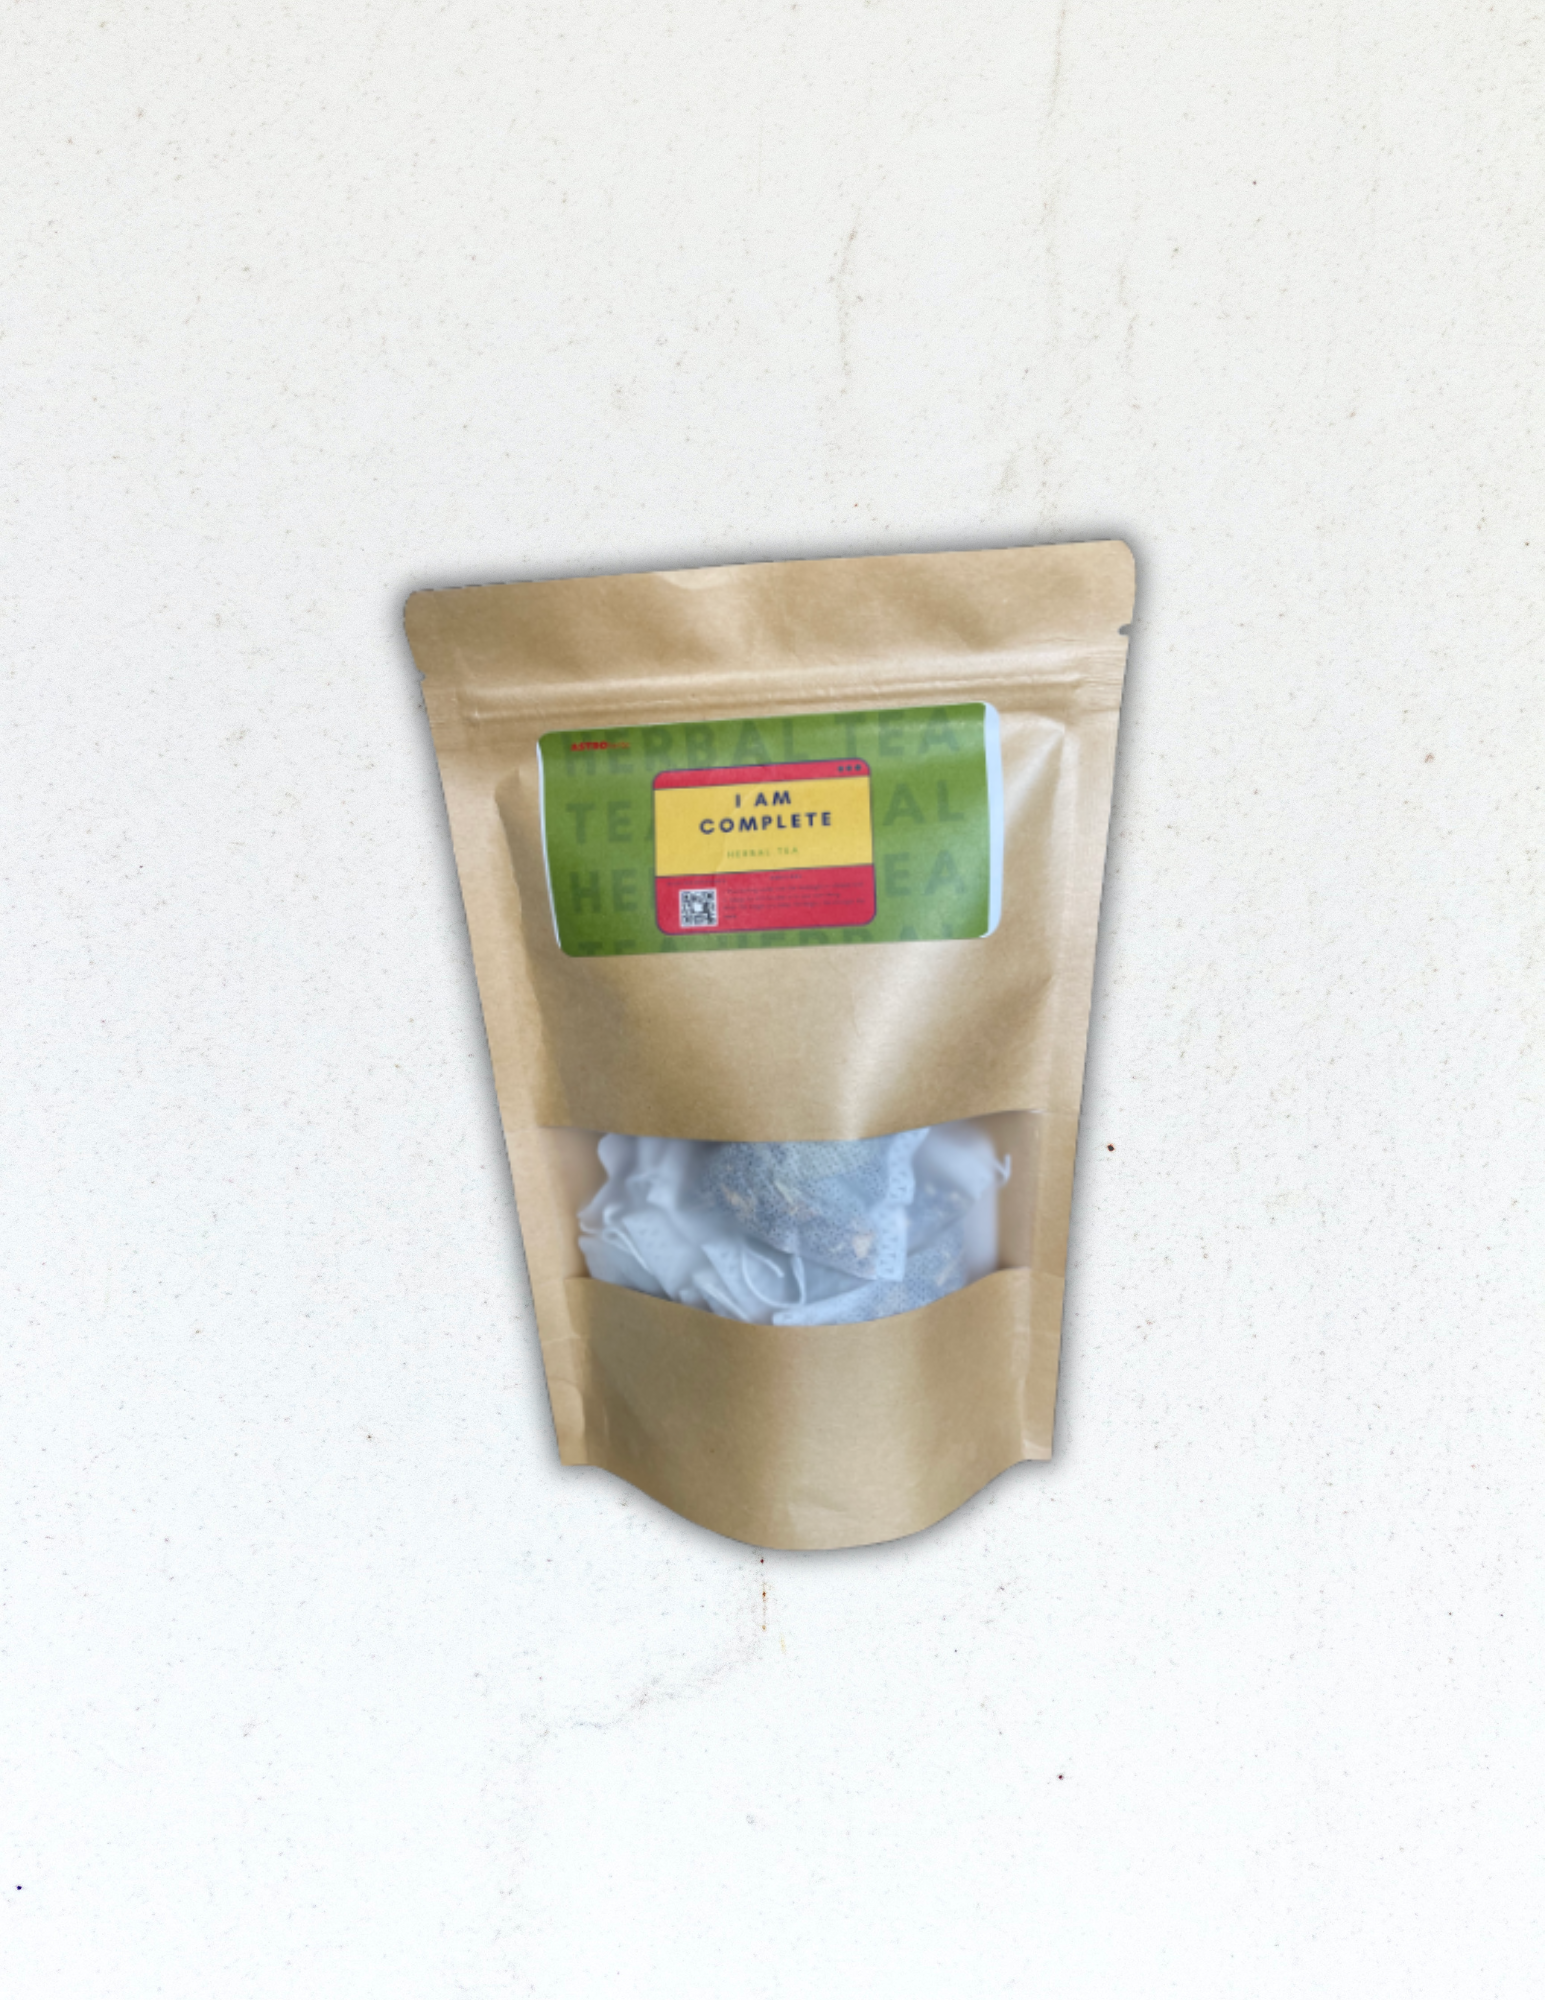 I Am Complete (12 Tea Bags) Mucus Removal/ Body Cleanse - ASTROherbs